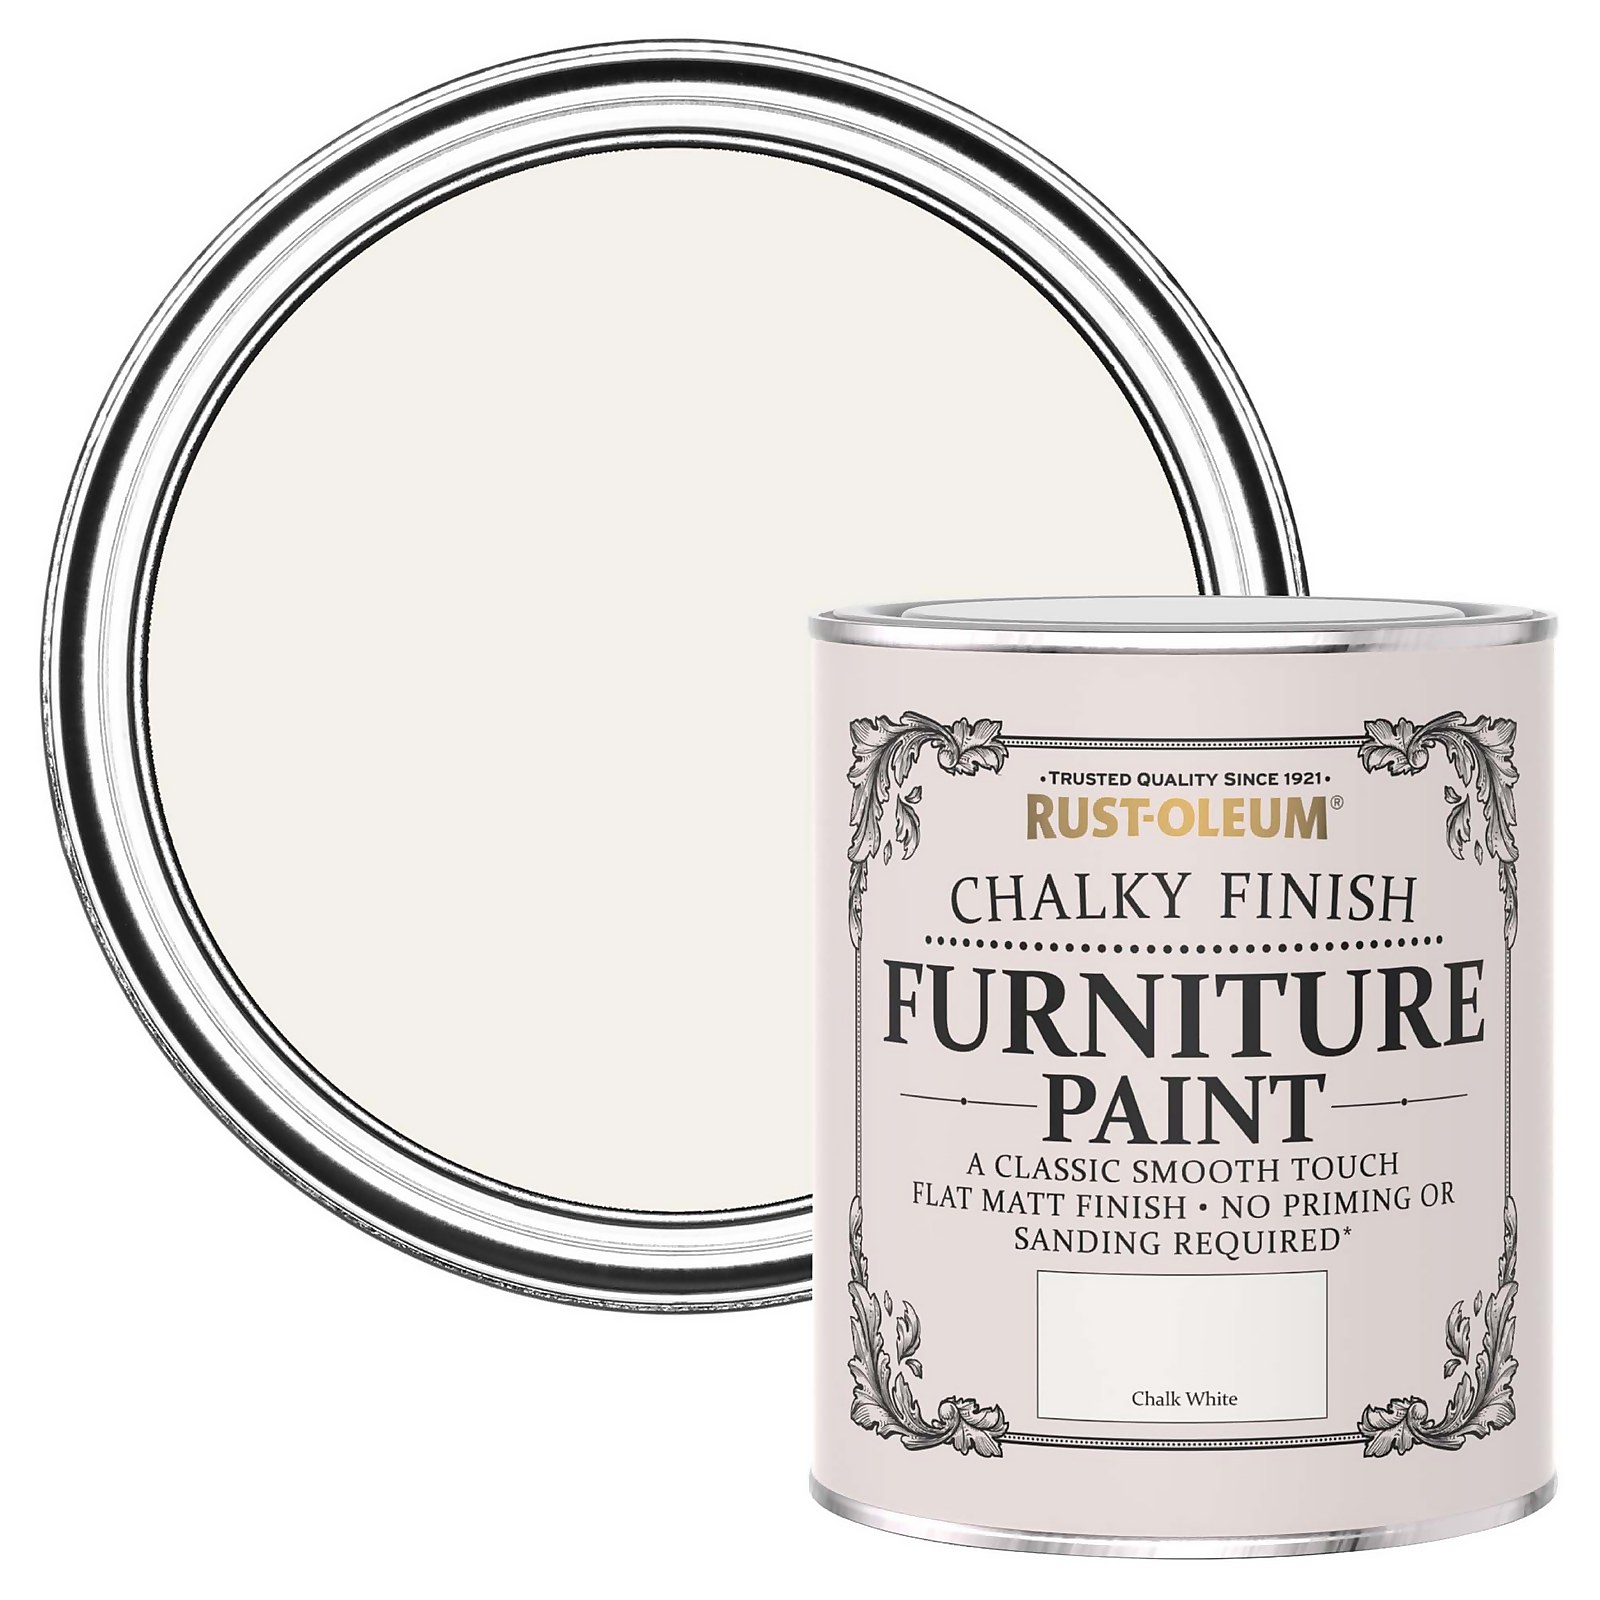 Photo of Rust-oleum Chalky Furniture Paint - Chalk White - 750ml